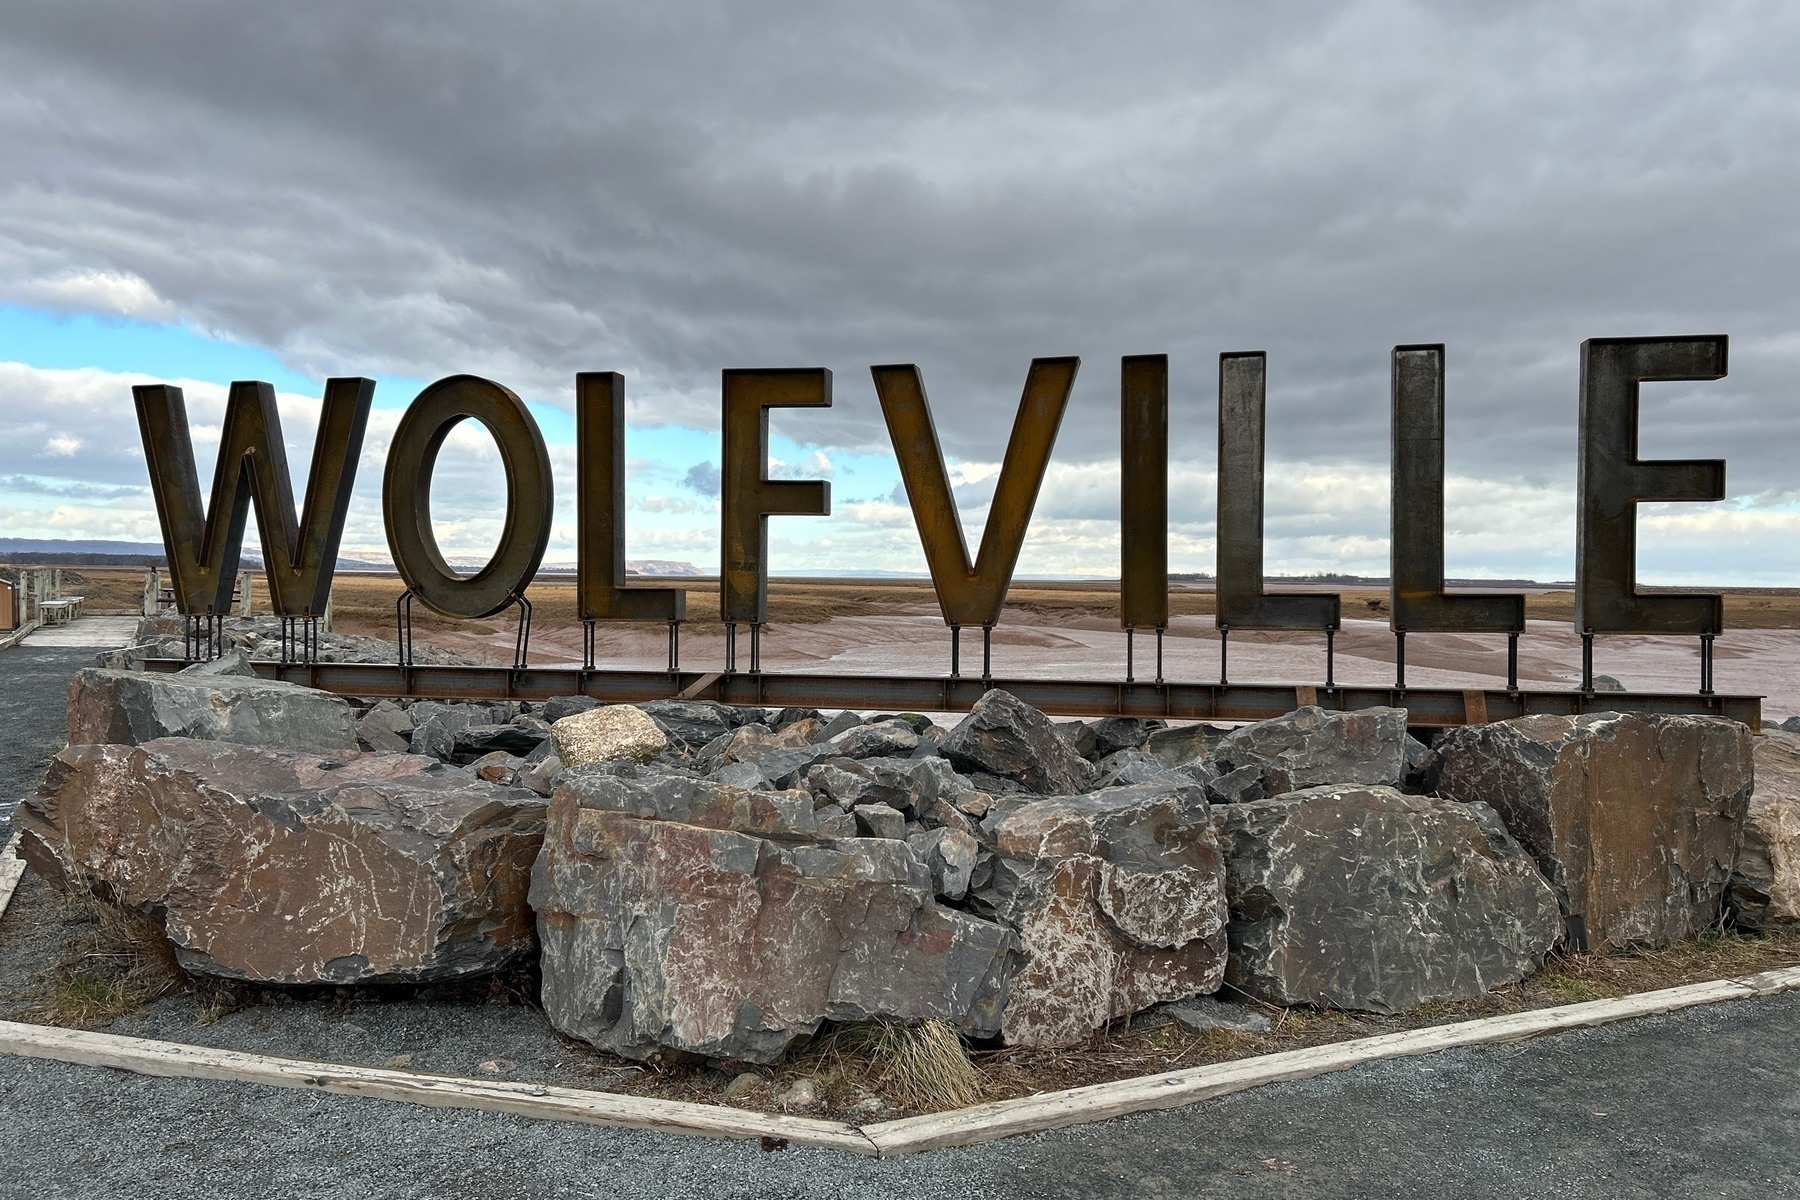 Metal artwork of the letters spelling Wolfville with a sidewalk in the foreground and clouds in the sky behind it. 